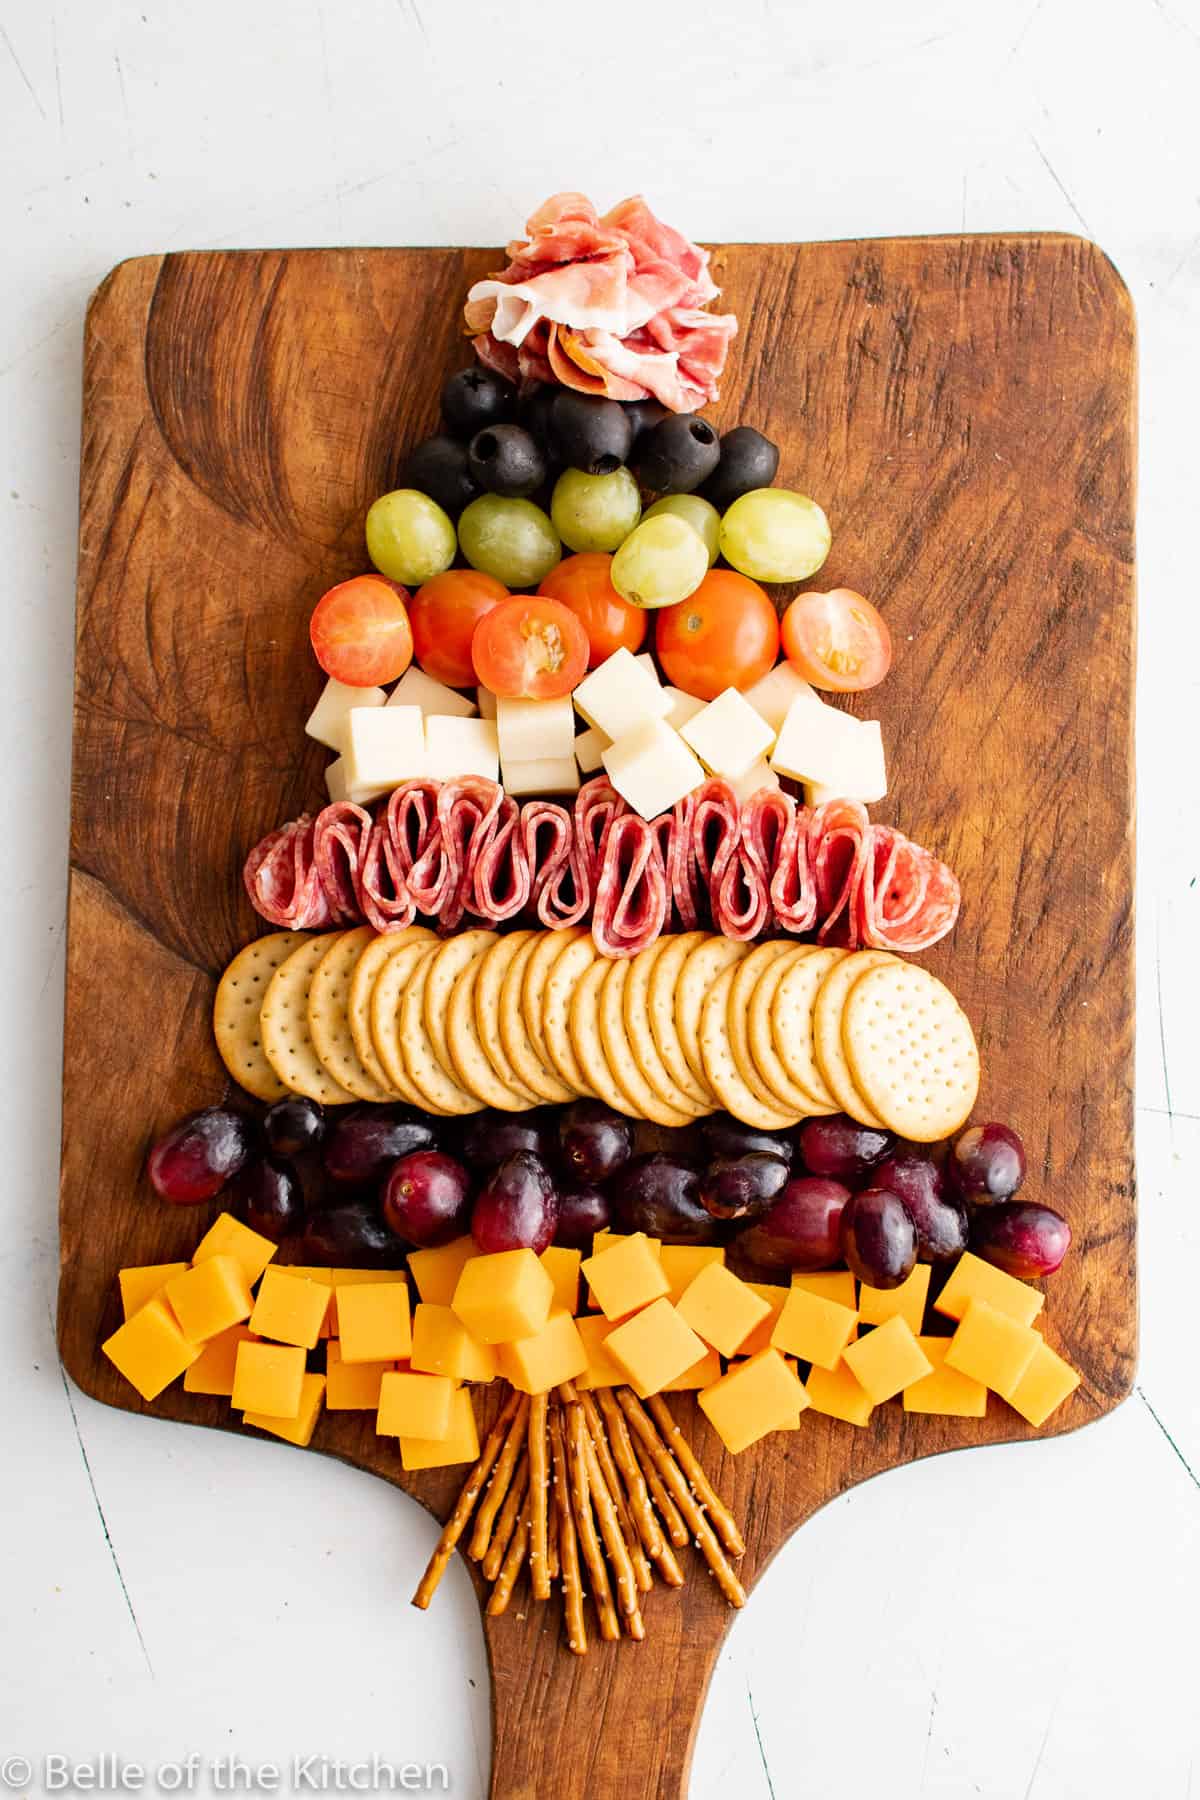 cut up cheese cubes, grapes, crackers, tomatoes, olives, prosciutto, and salami on a wooden cutting board.